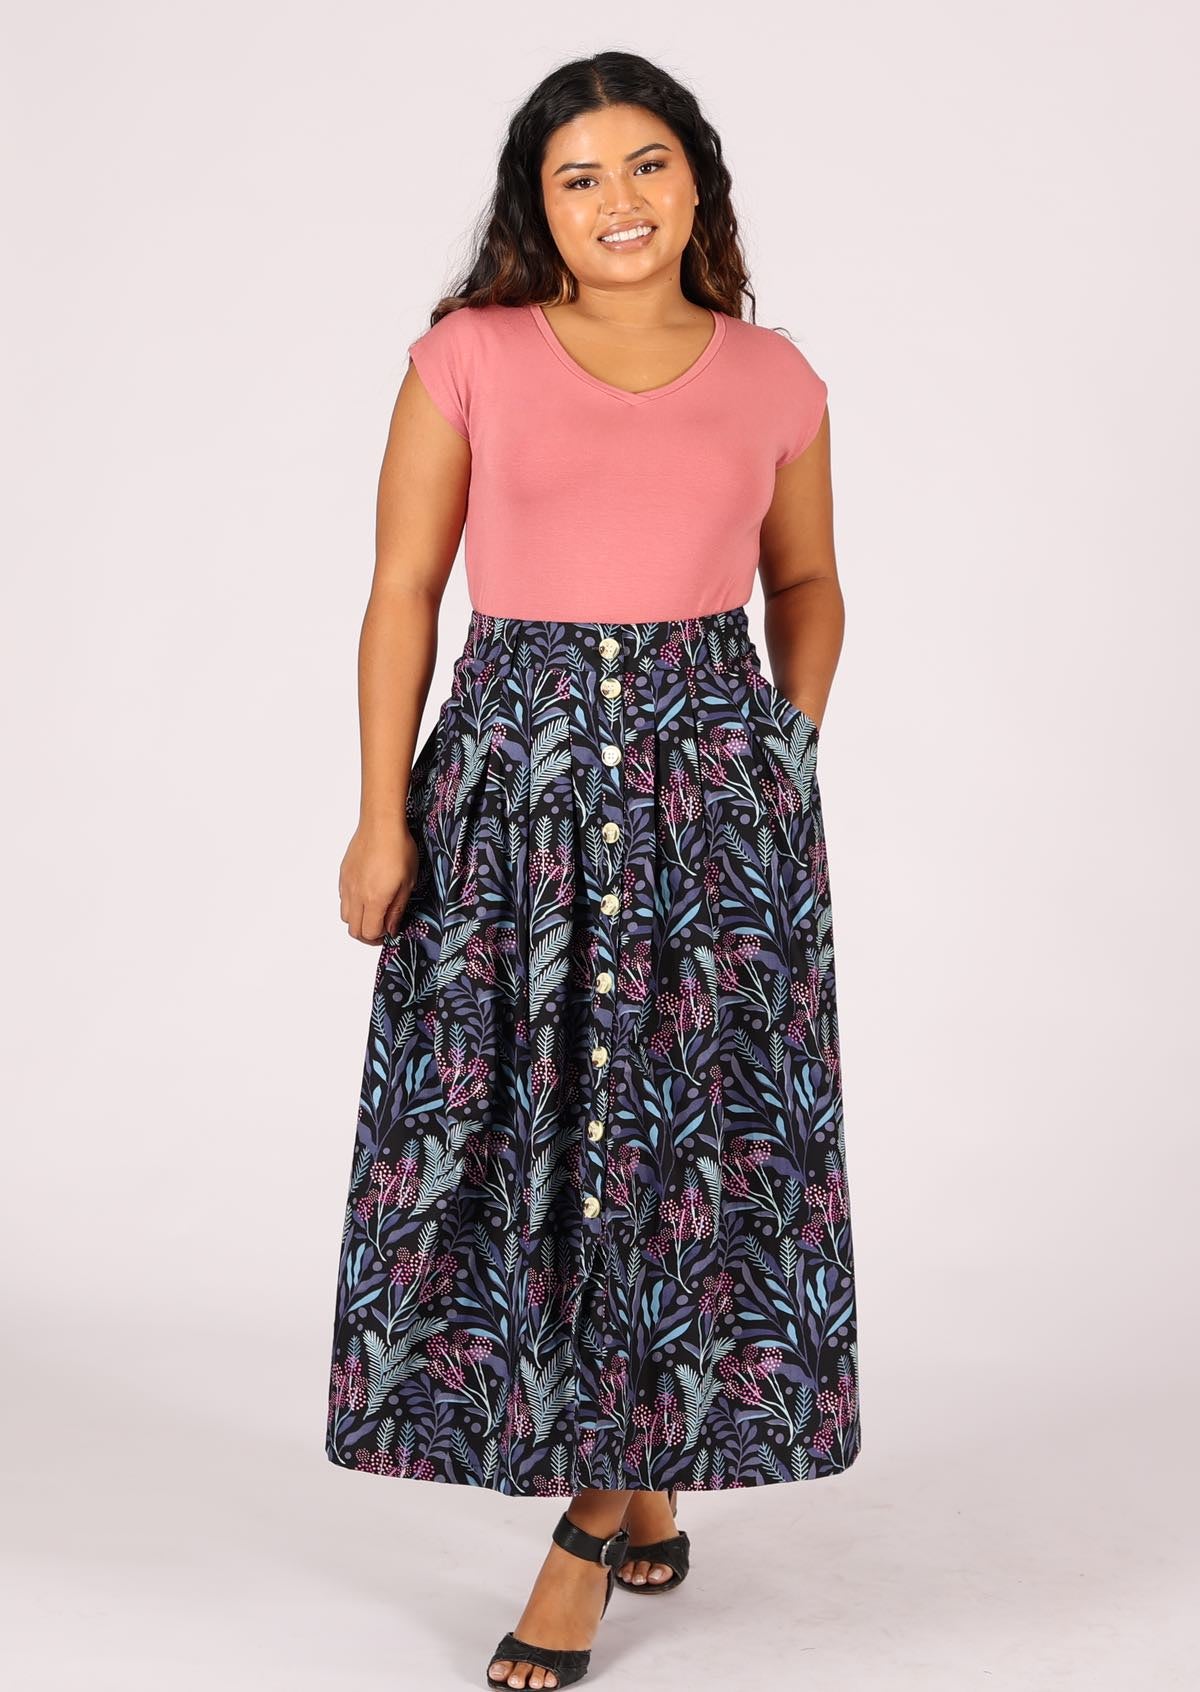 Botanical print cotton skirt with pockets and box pleats